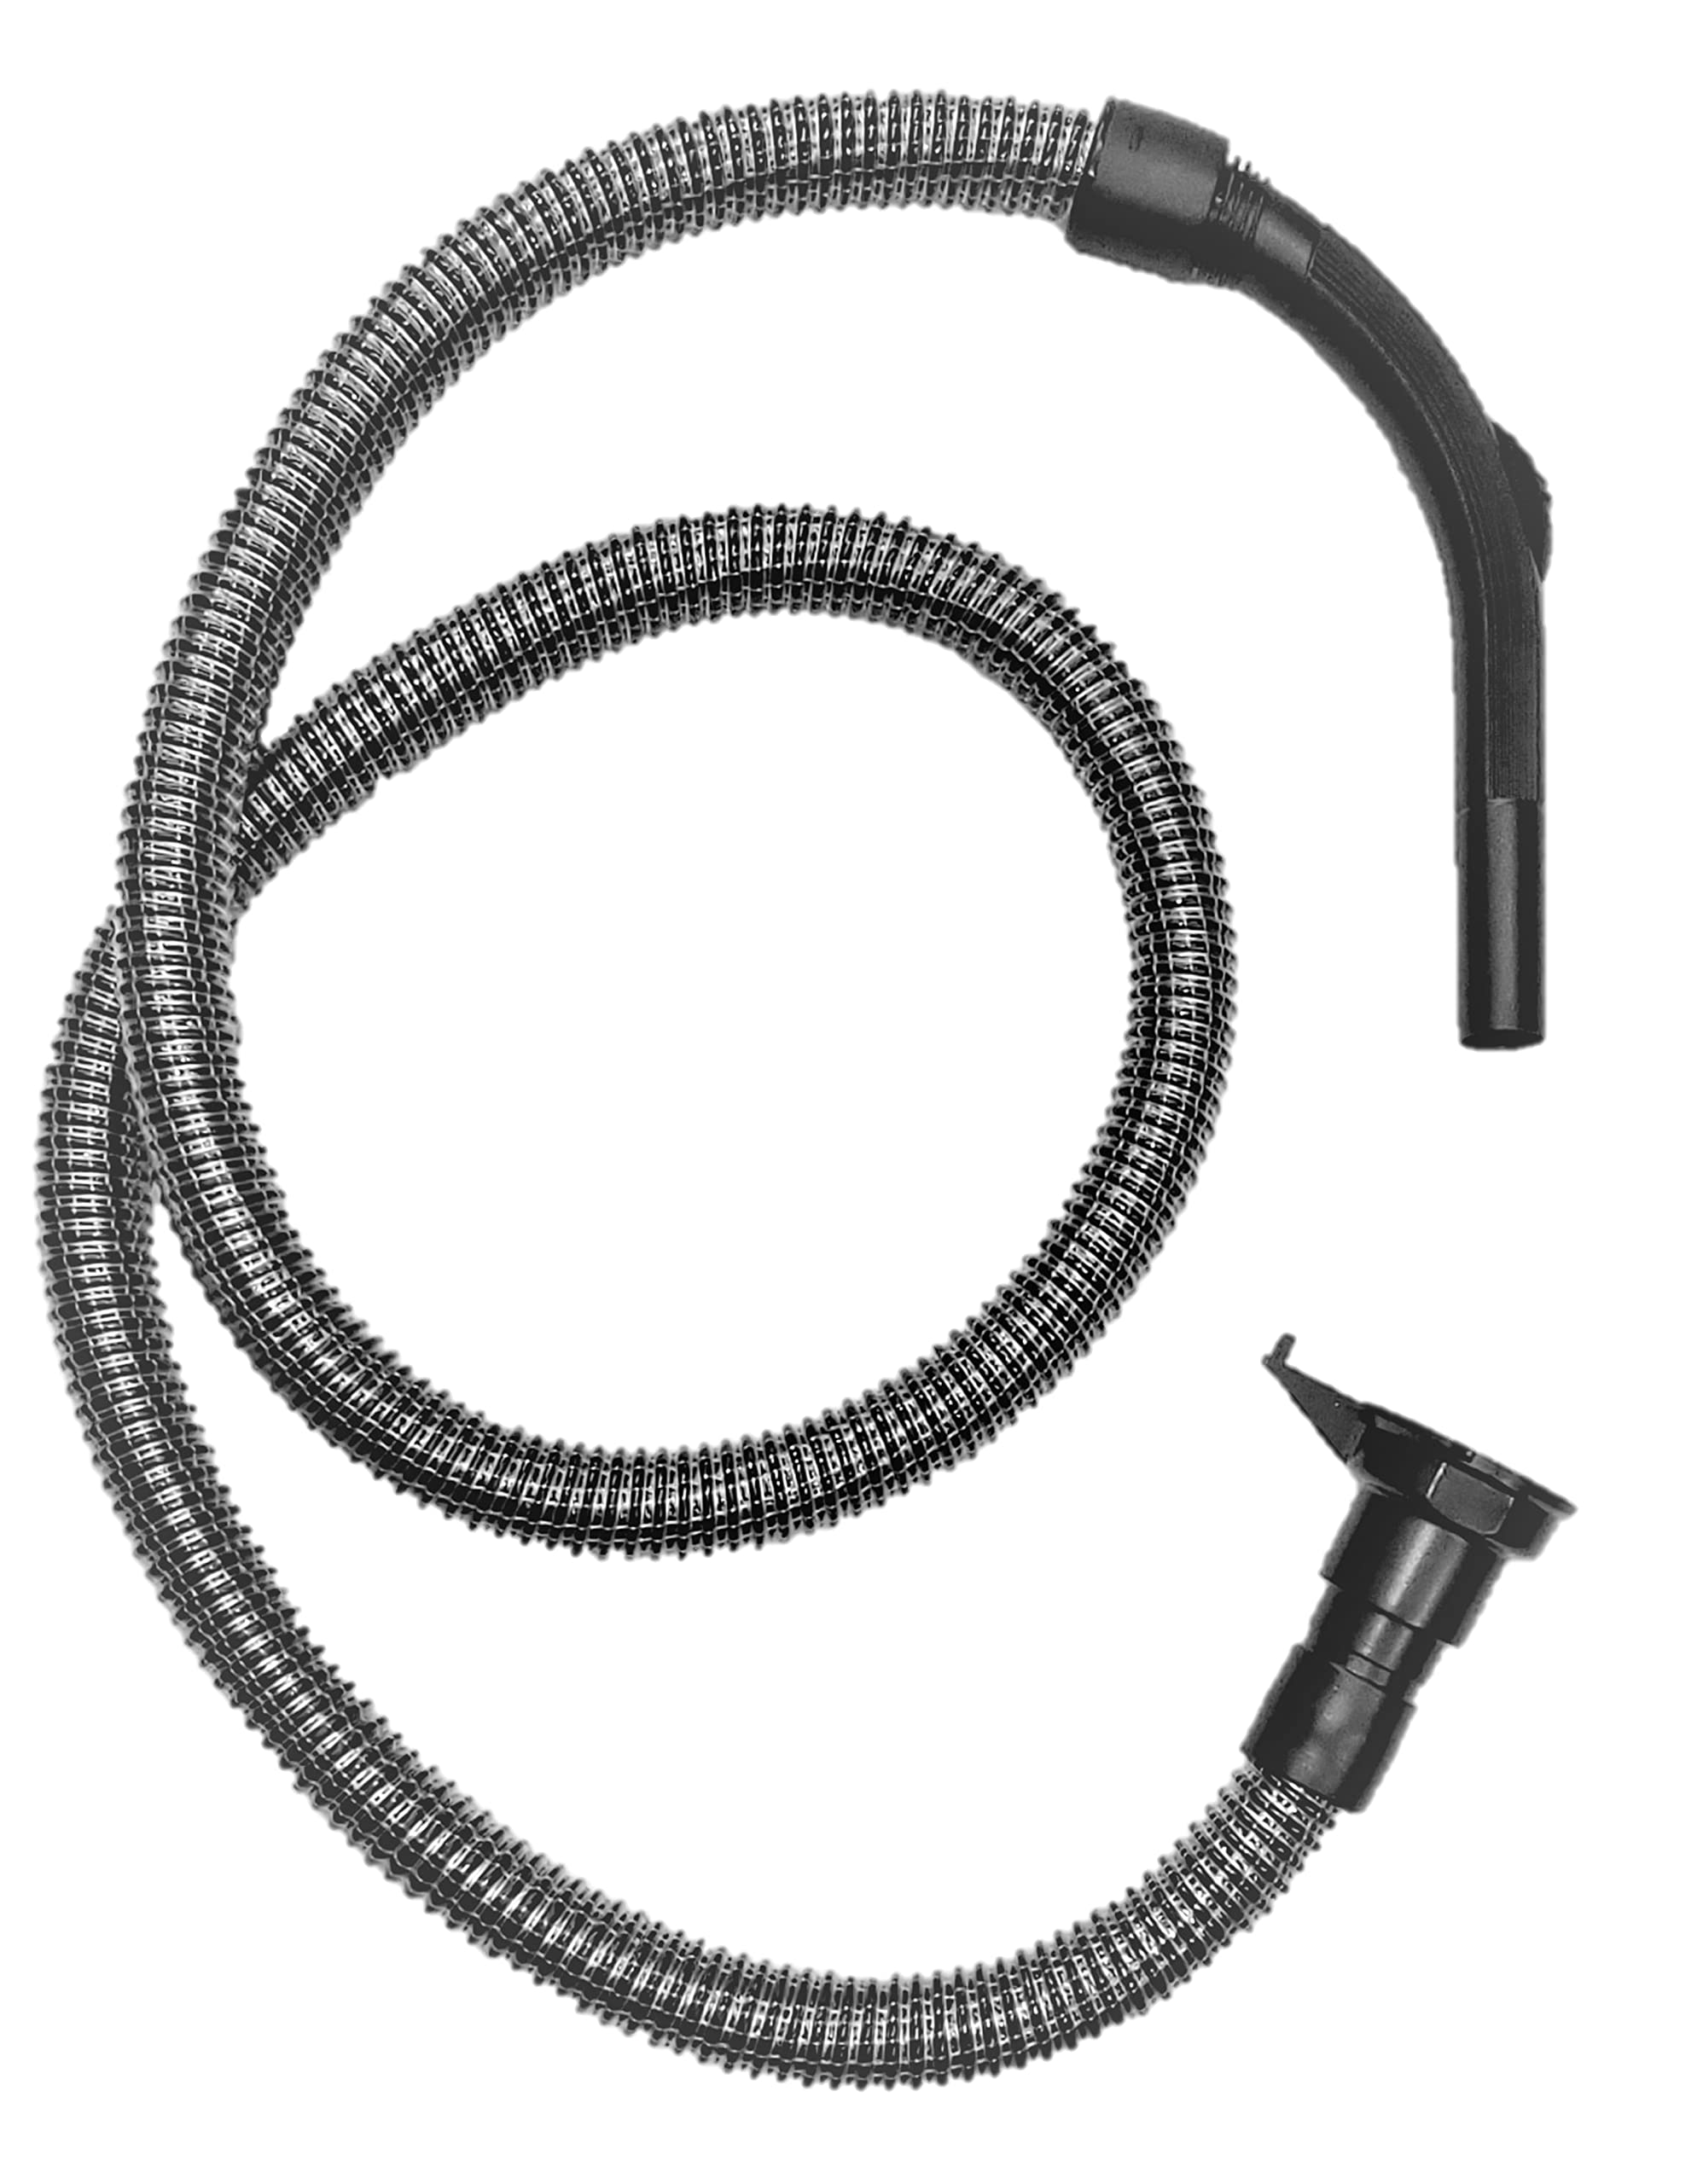 Casa Vacuums 9 FT Wire Reinforced Hose Compatible with Kirby Generation G3/G4/G5/G6 Sentria I II Avalir I II Upright Cleaner.